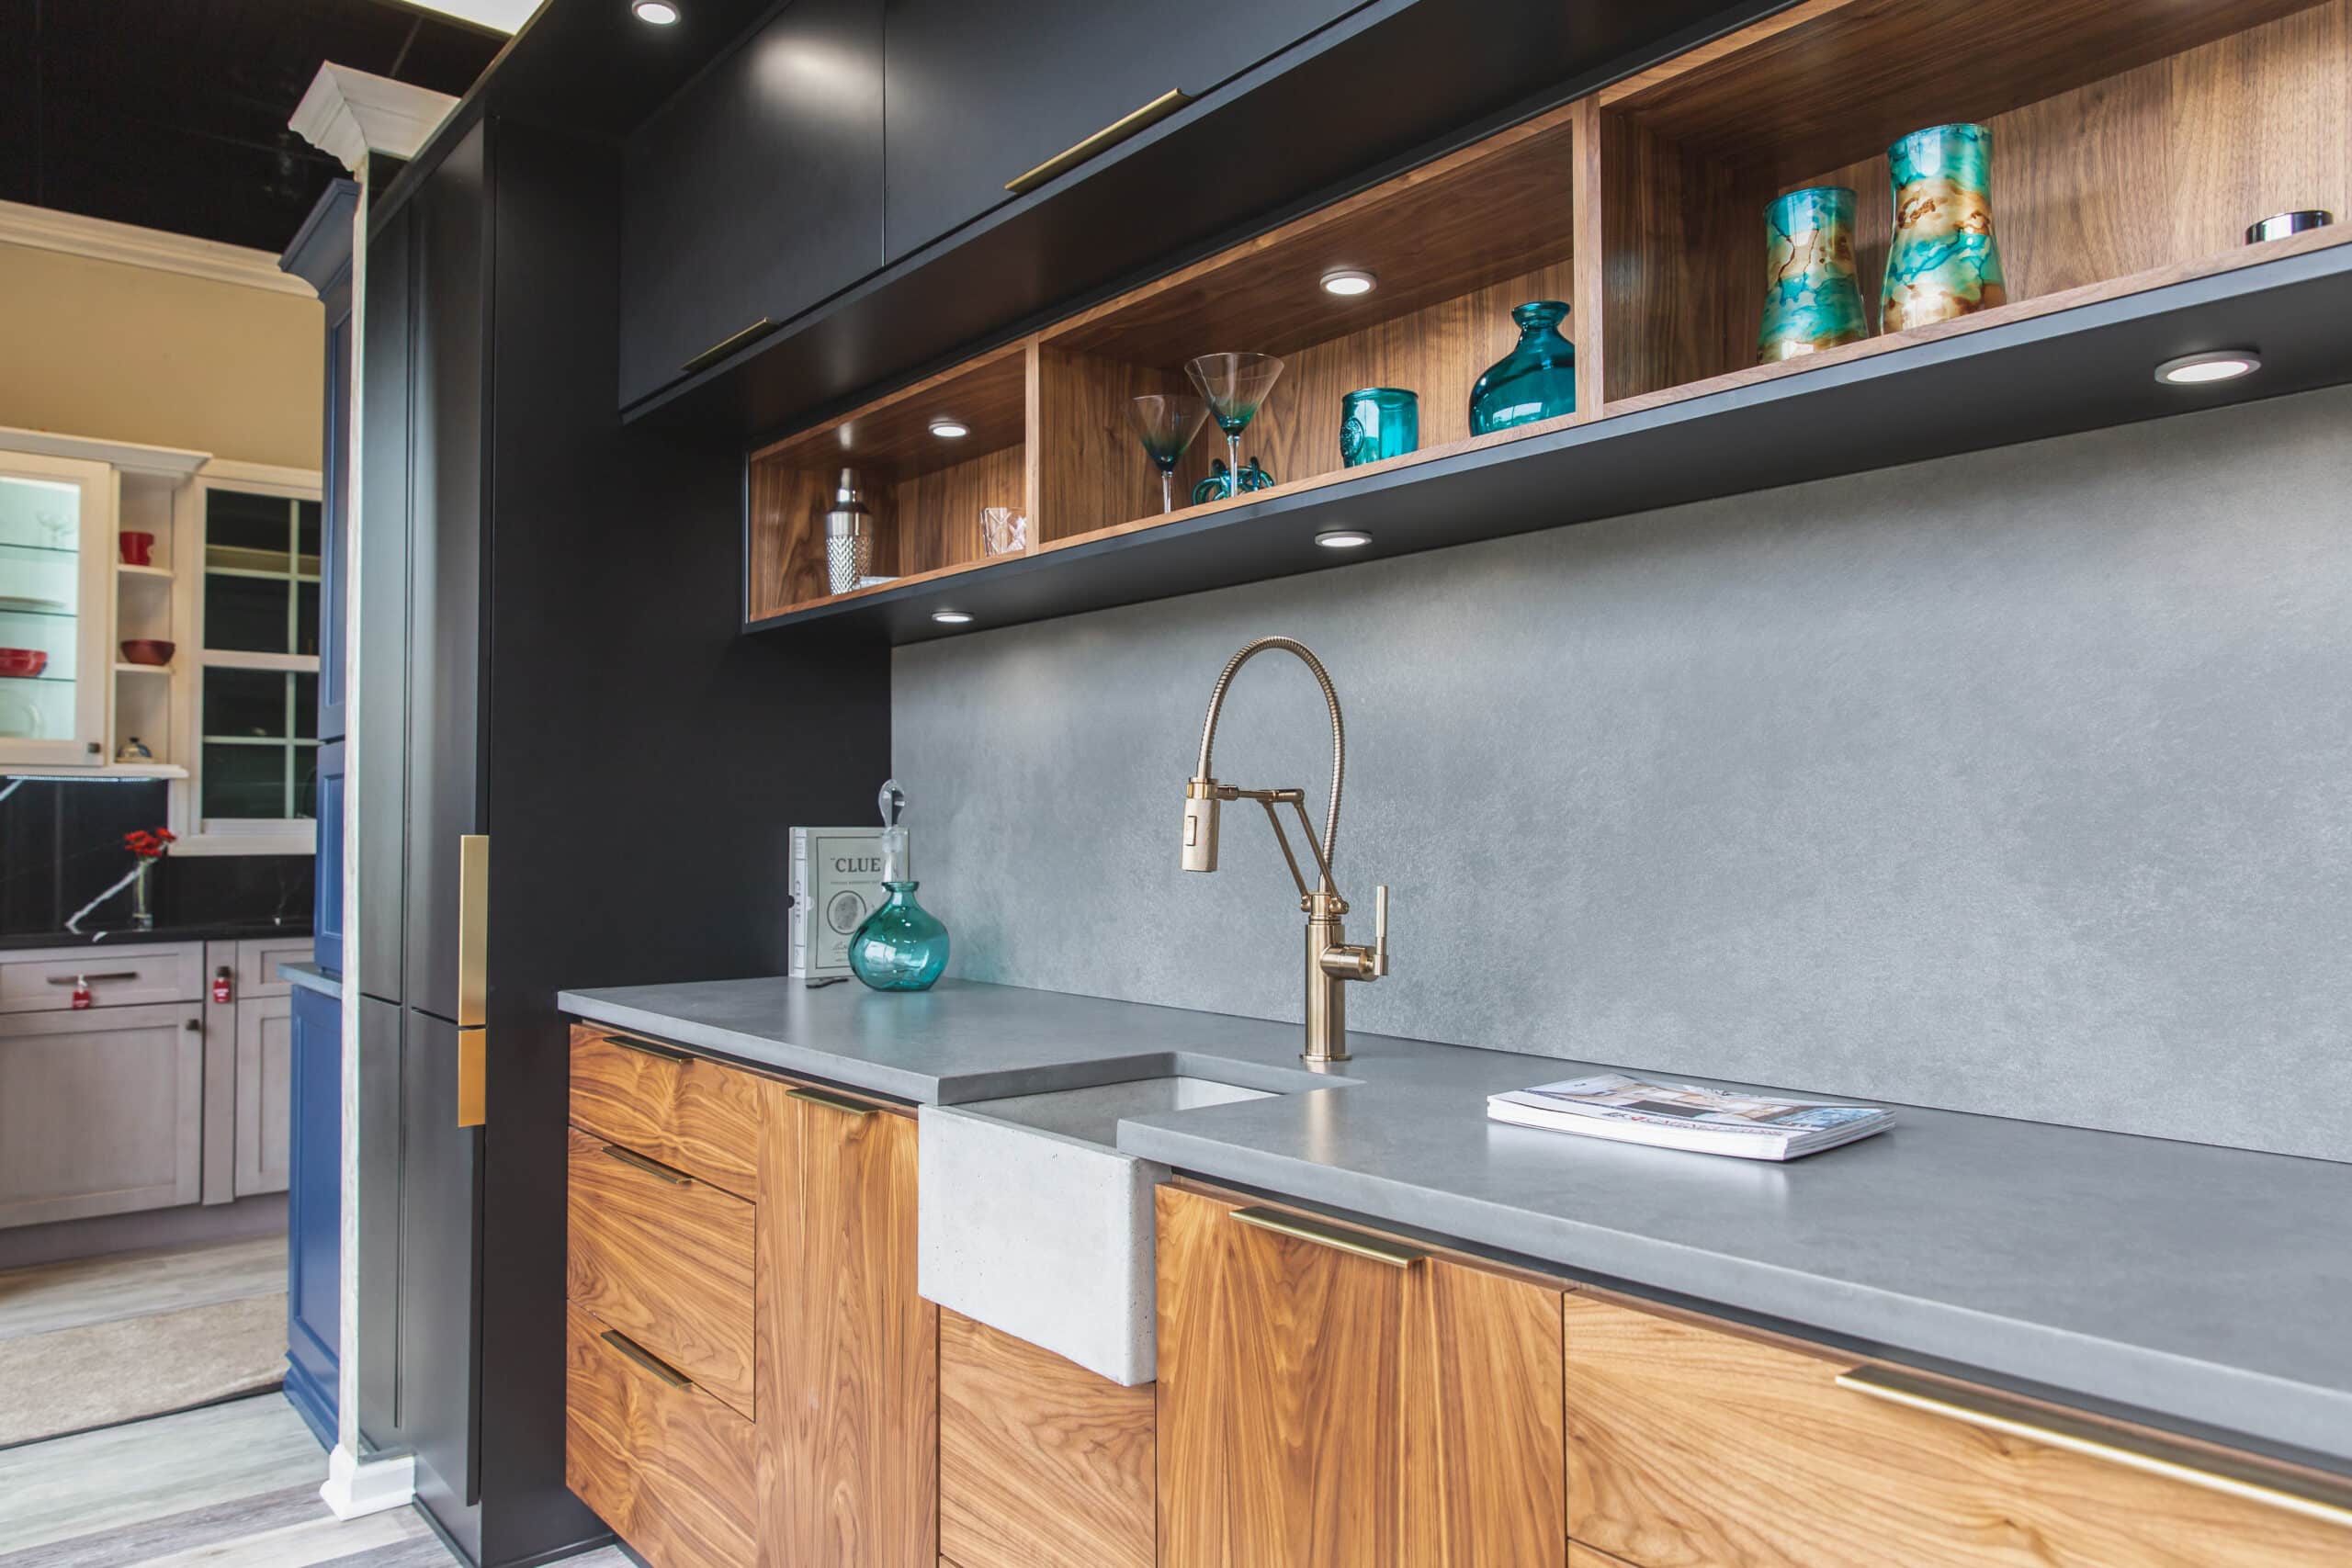 A well-equipped kitchen with a sink, countertop, and cabinets for storage